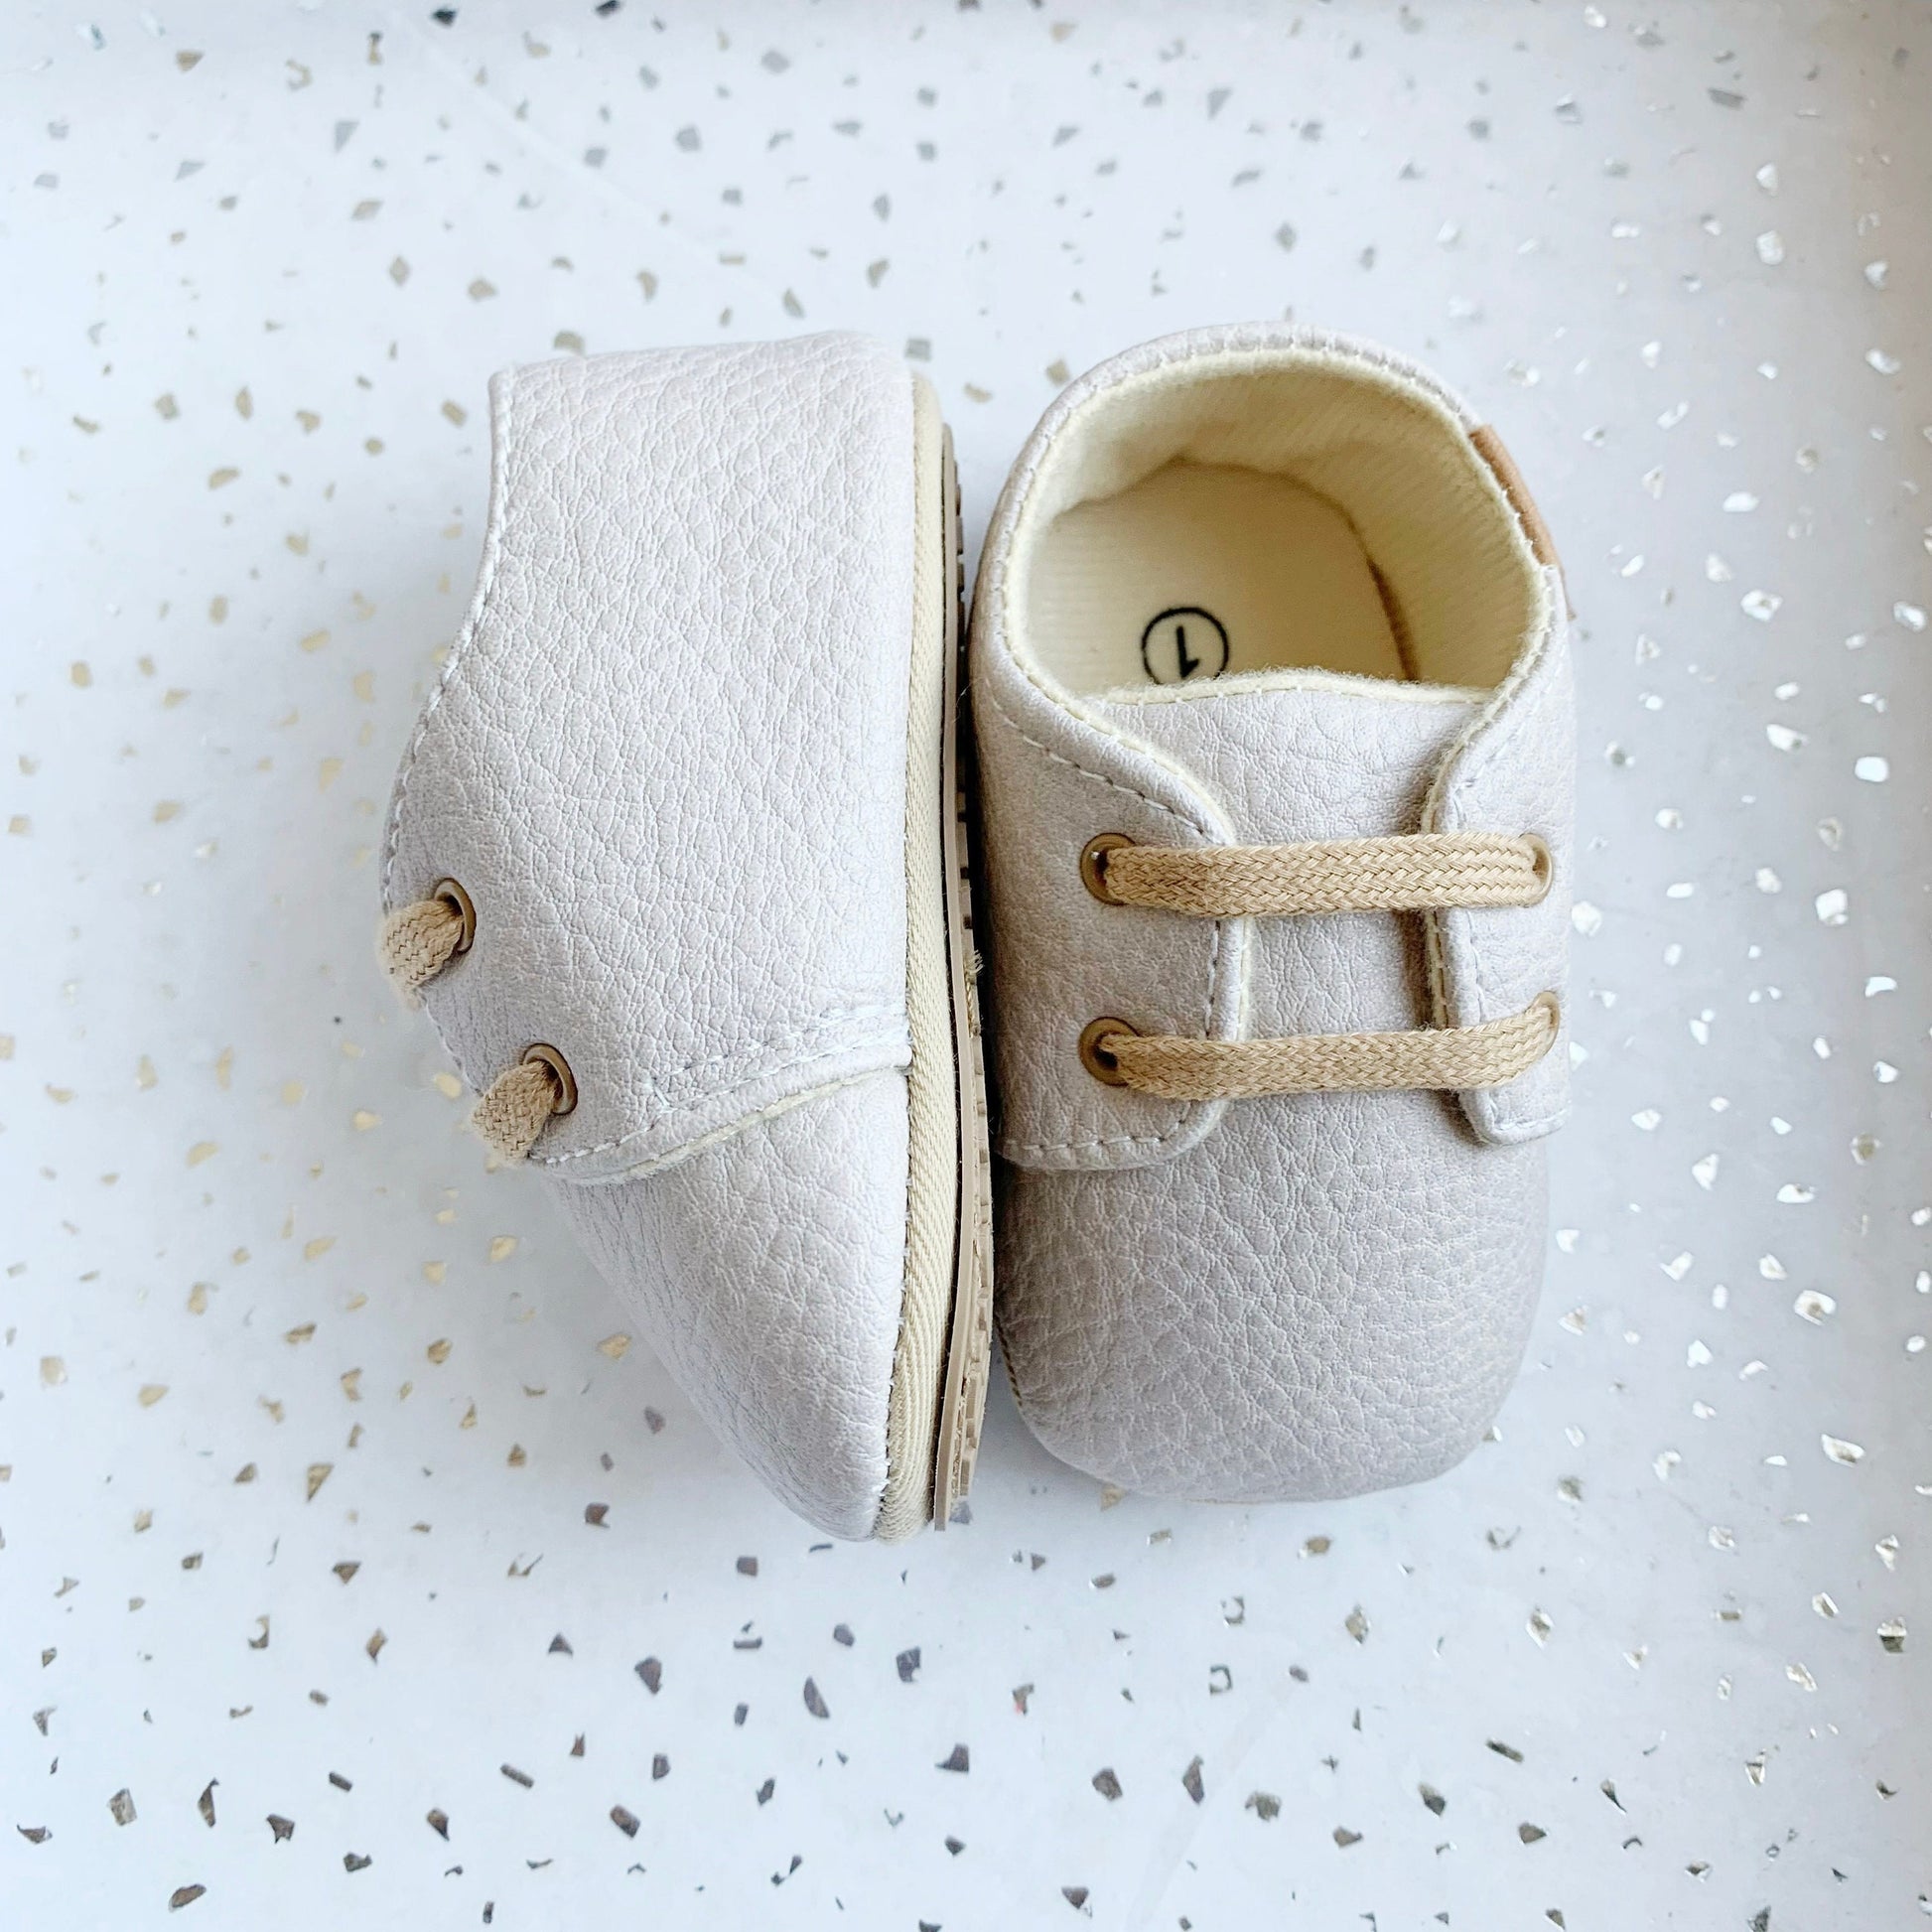 Coming Home Baby Outfit - Hello, My Name is - Baby Shoes and Rattle.